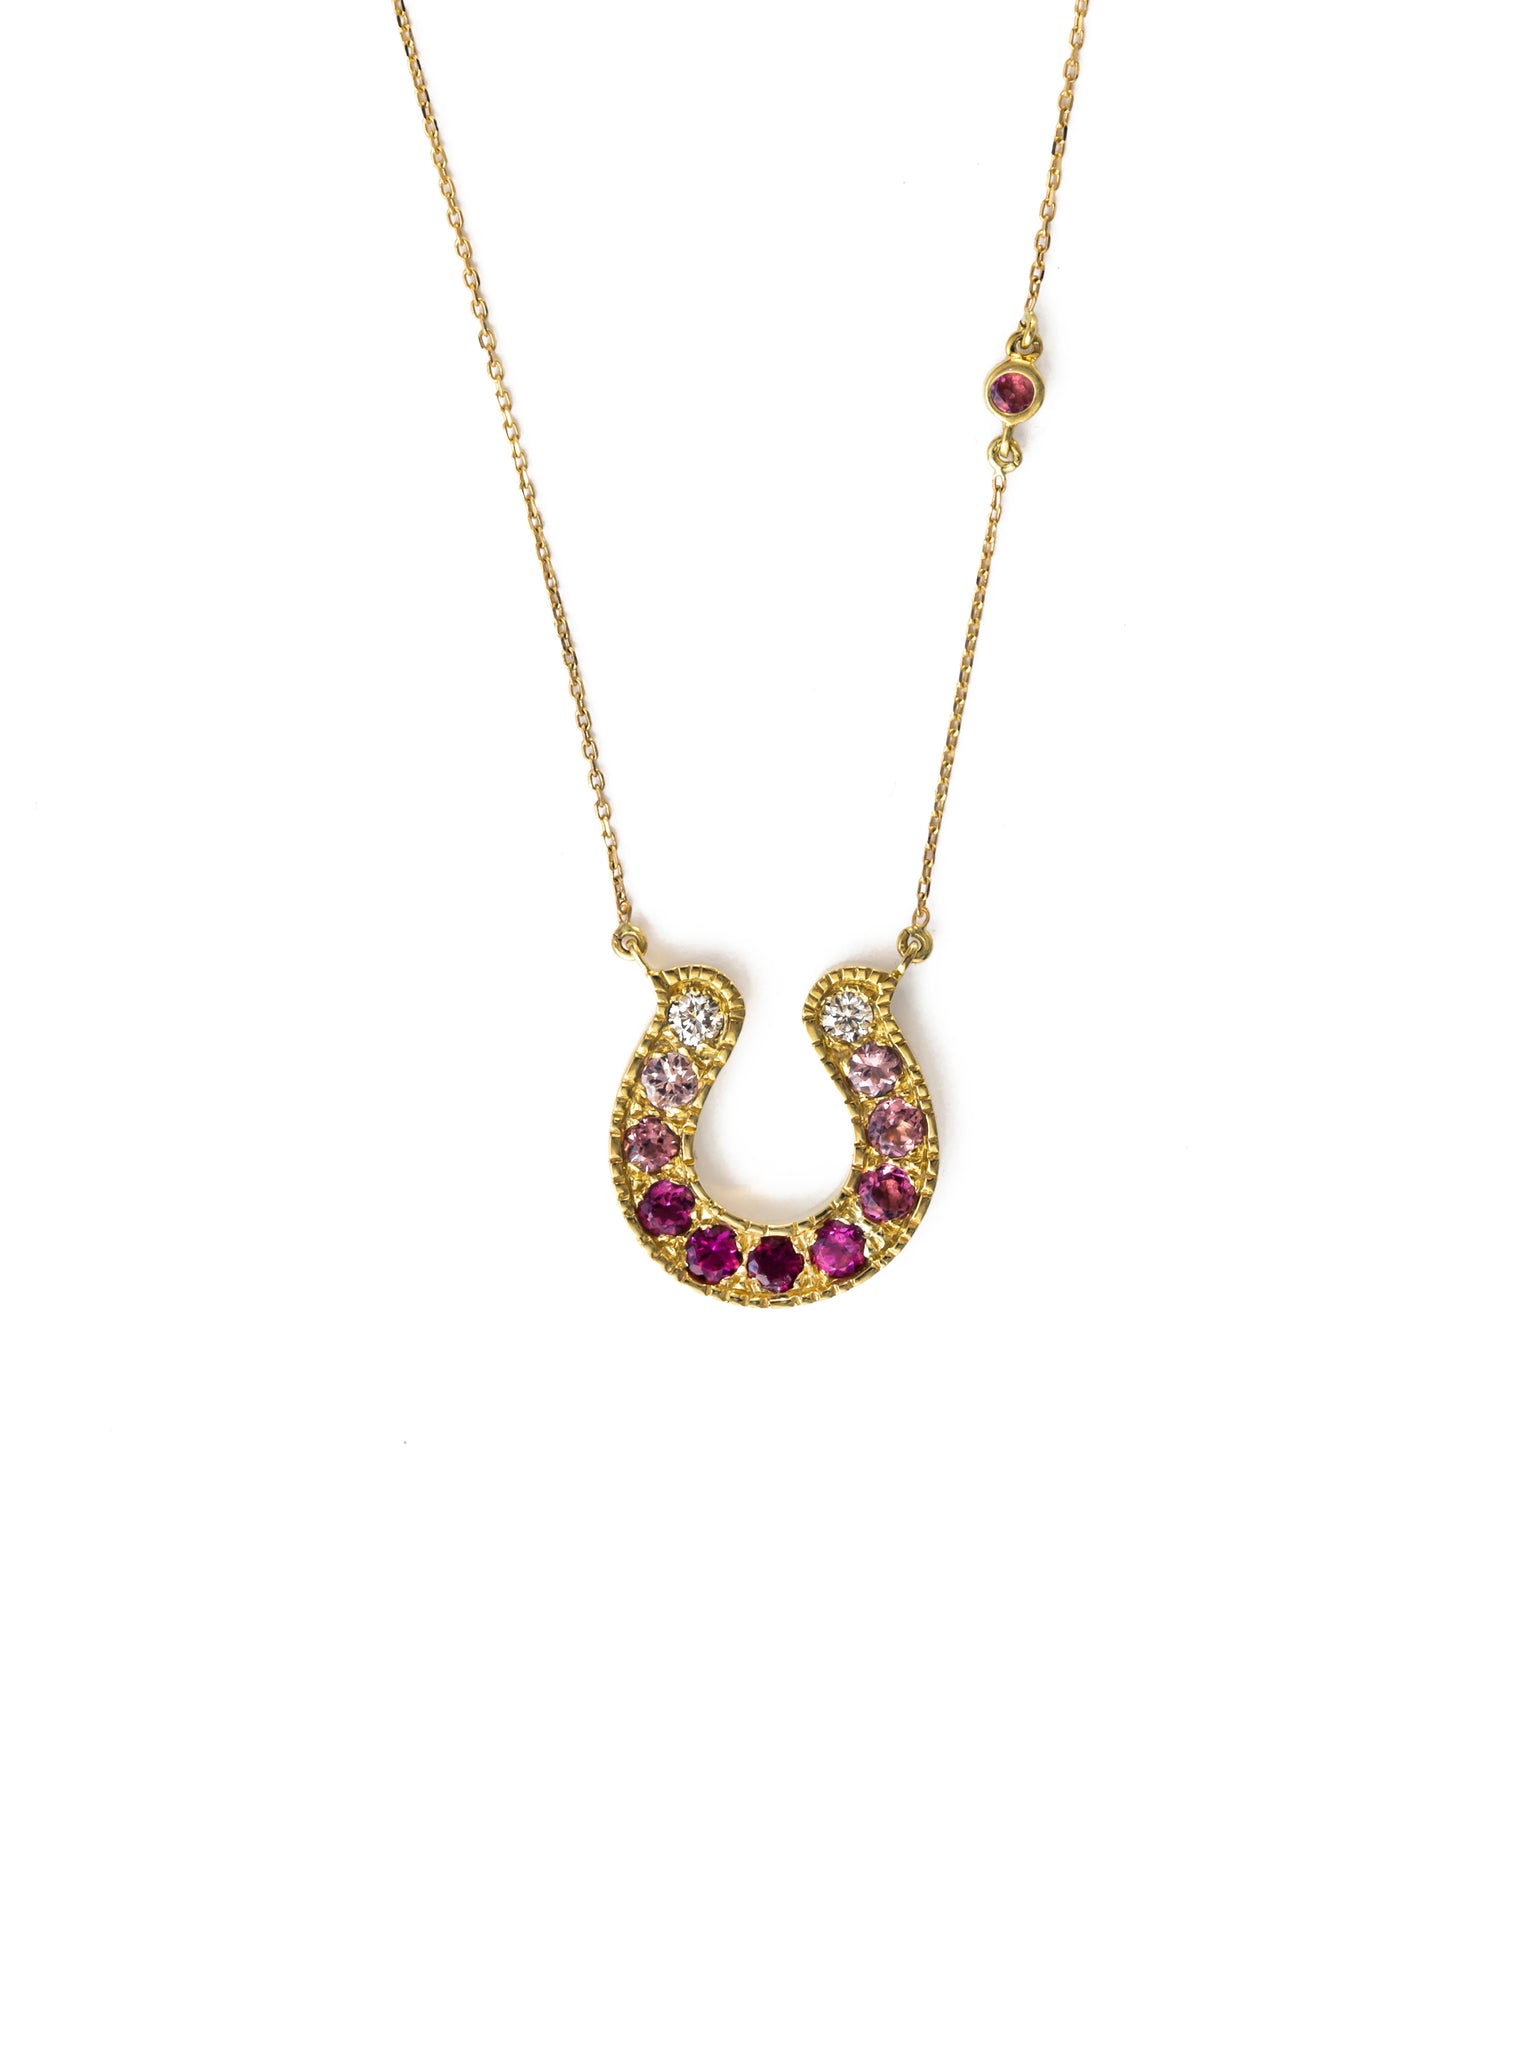 Horseshoe Necklace with Pink Tourmaline and Diamond Ombre